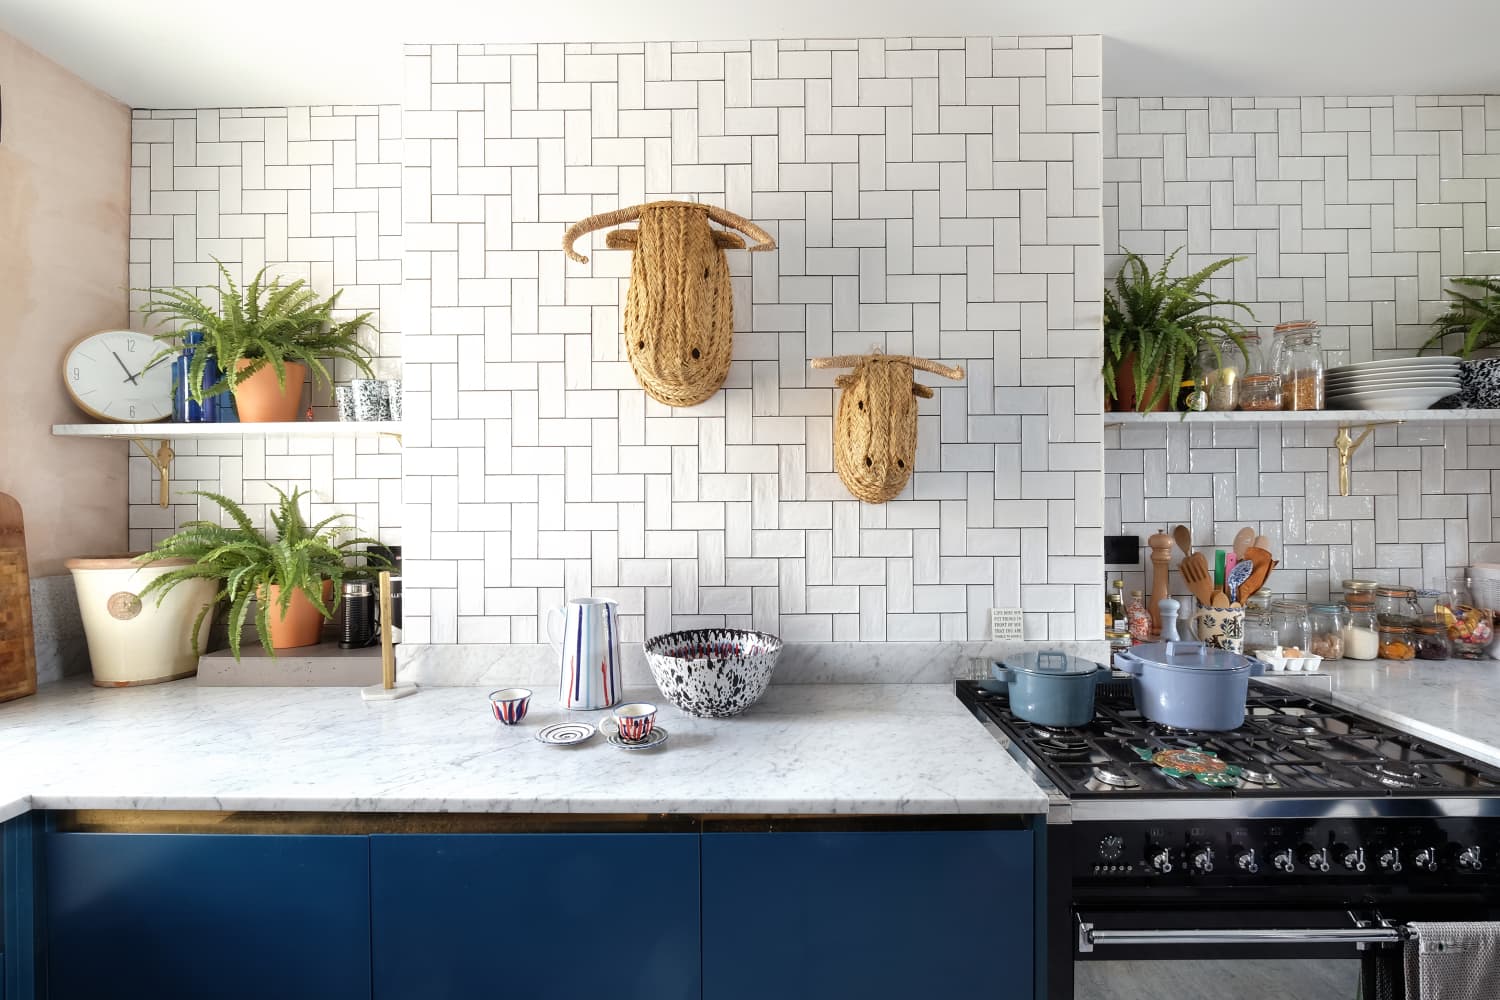 20 Backsplash Ideas to Inspire You   Apartment Therapy